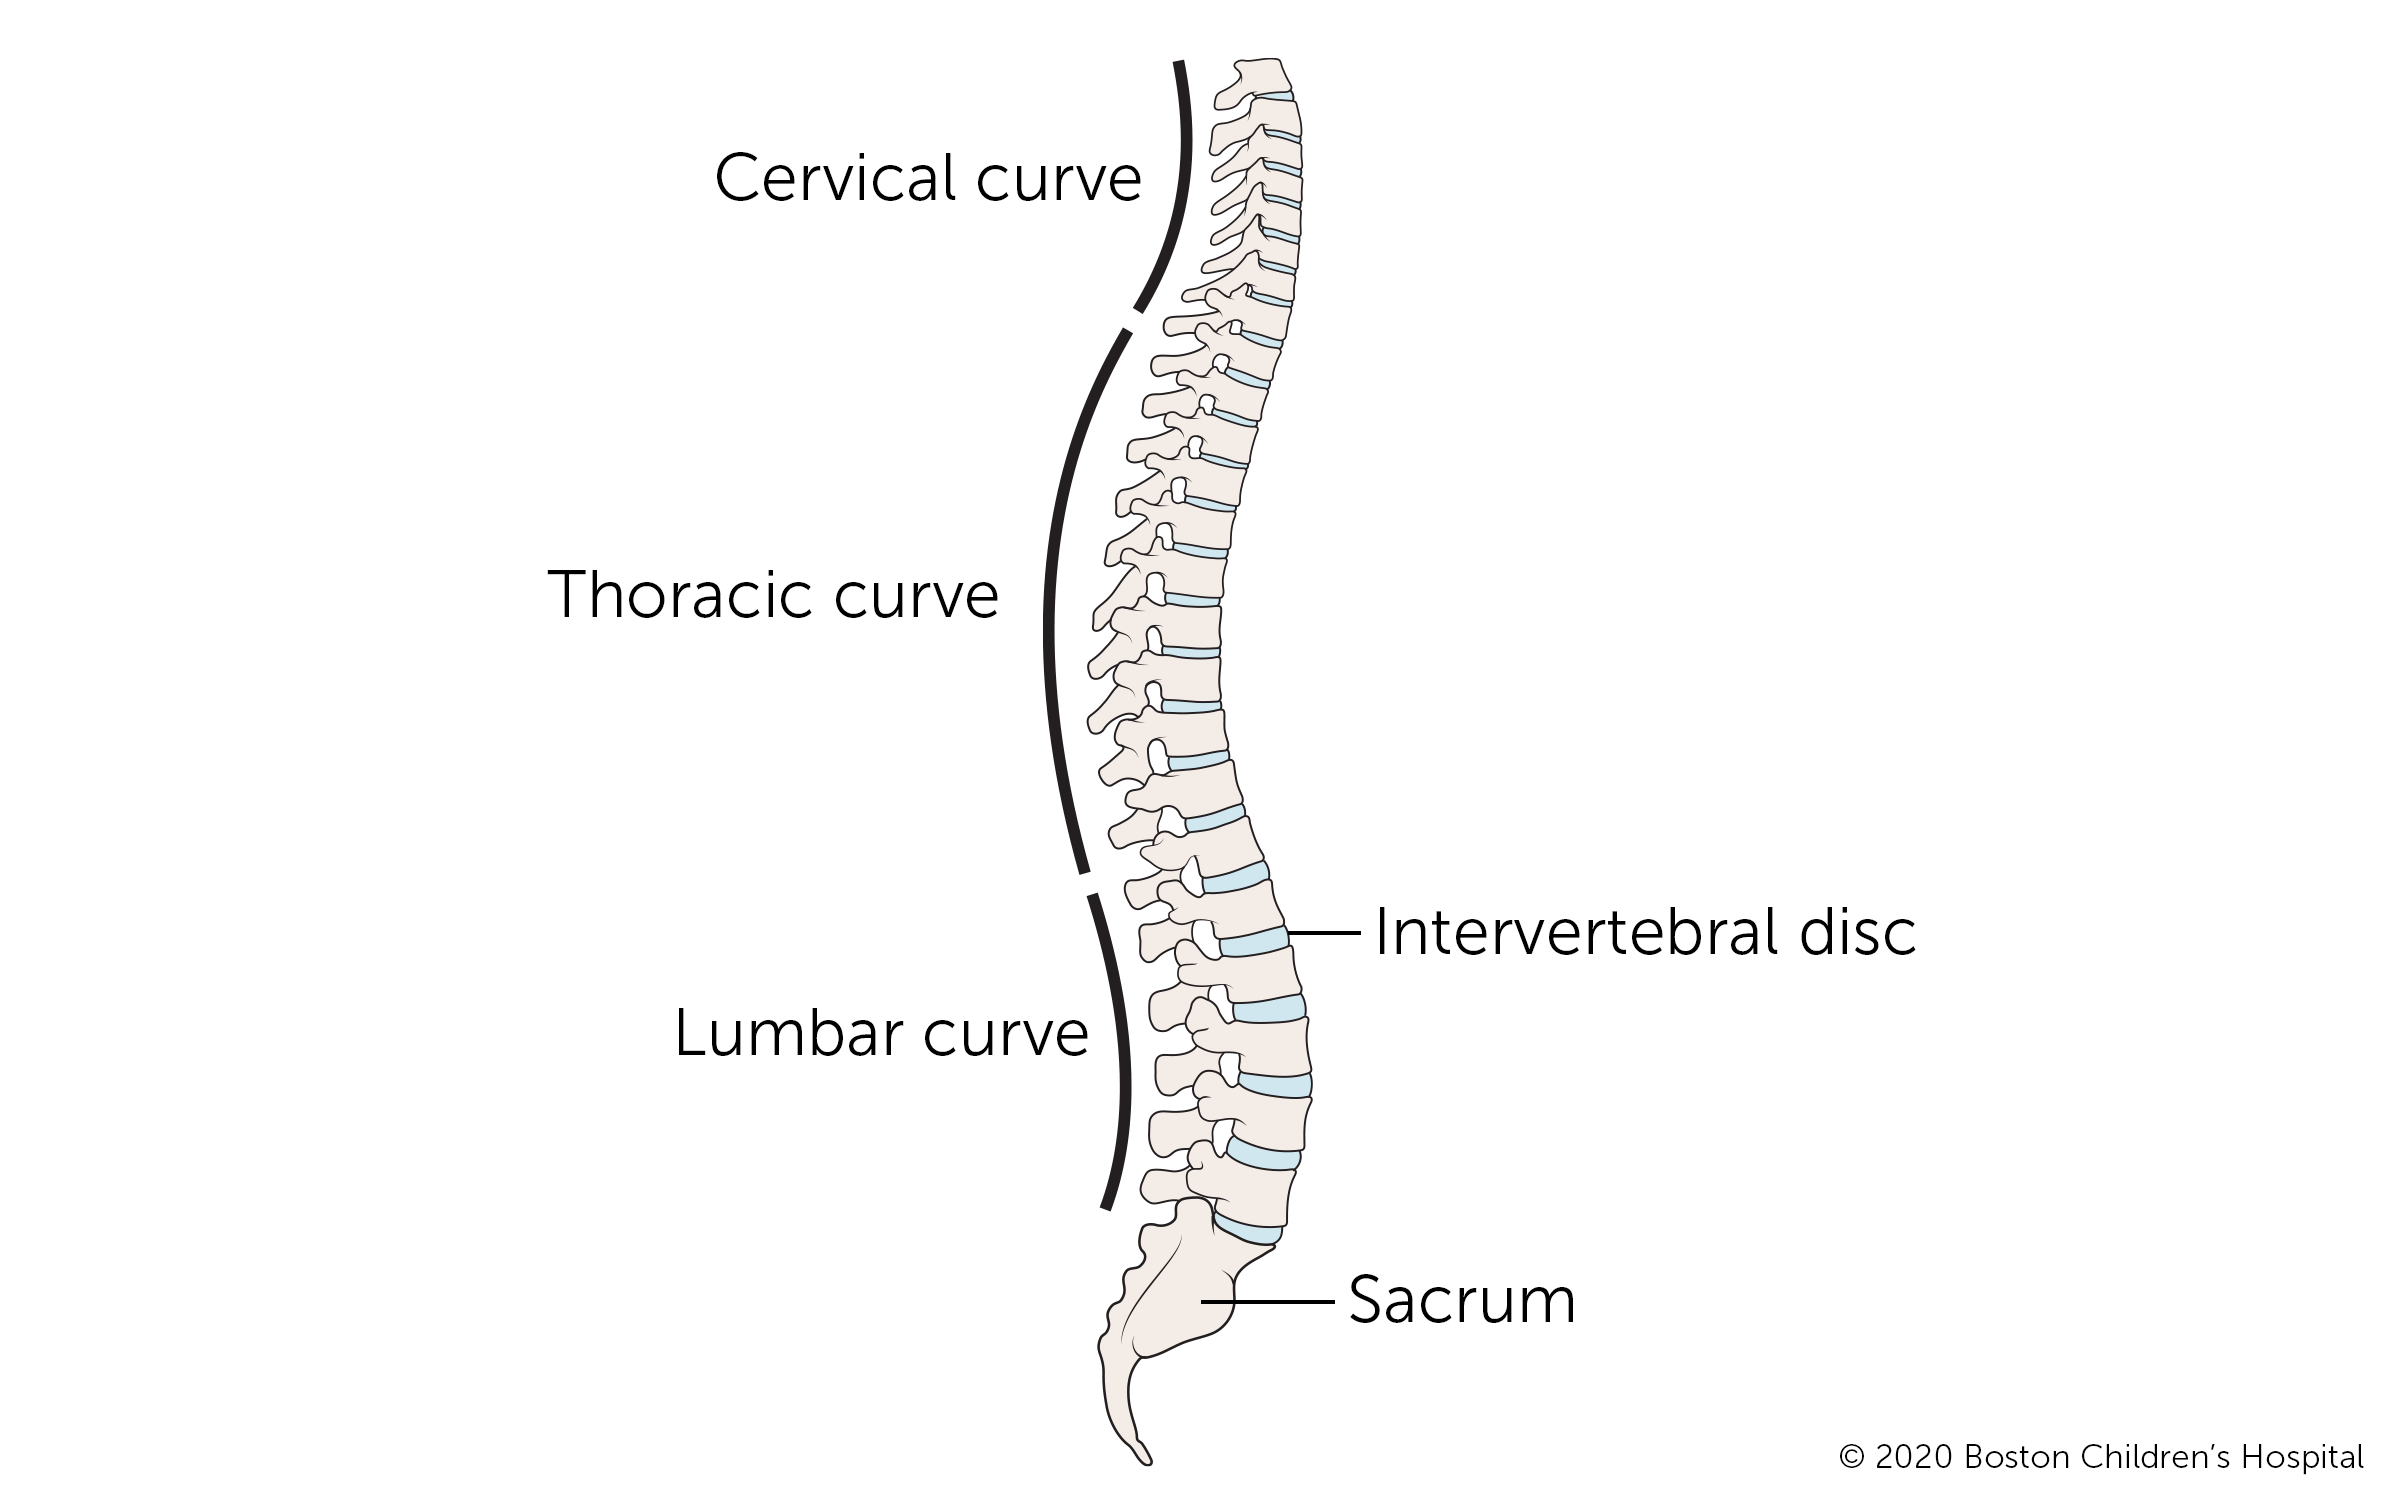 From top to bottom, the regions of the spine are cervical (the neck), thoracic (mid back), lumbar (lower back), and sacral (tailbone).